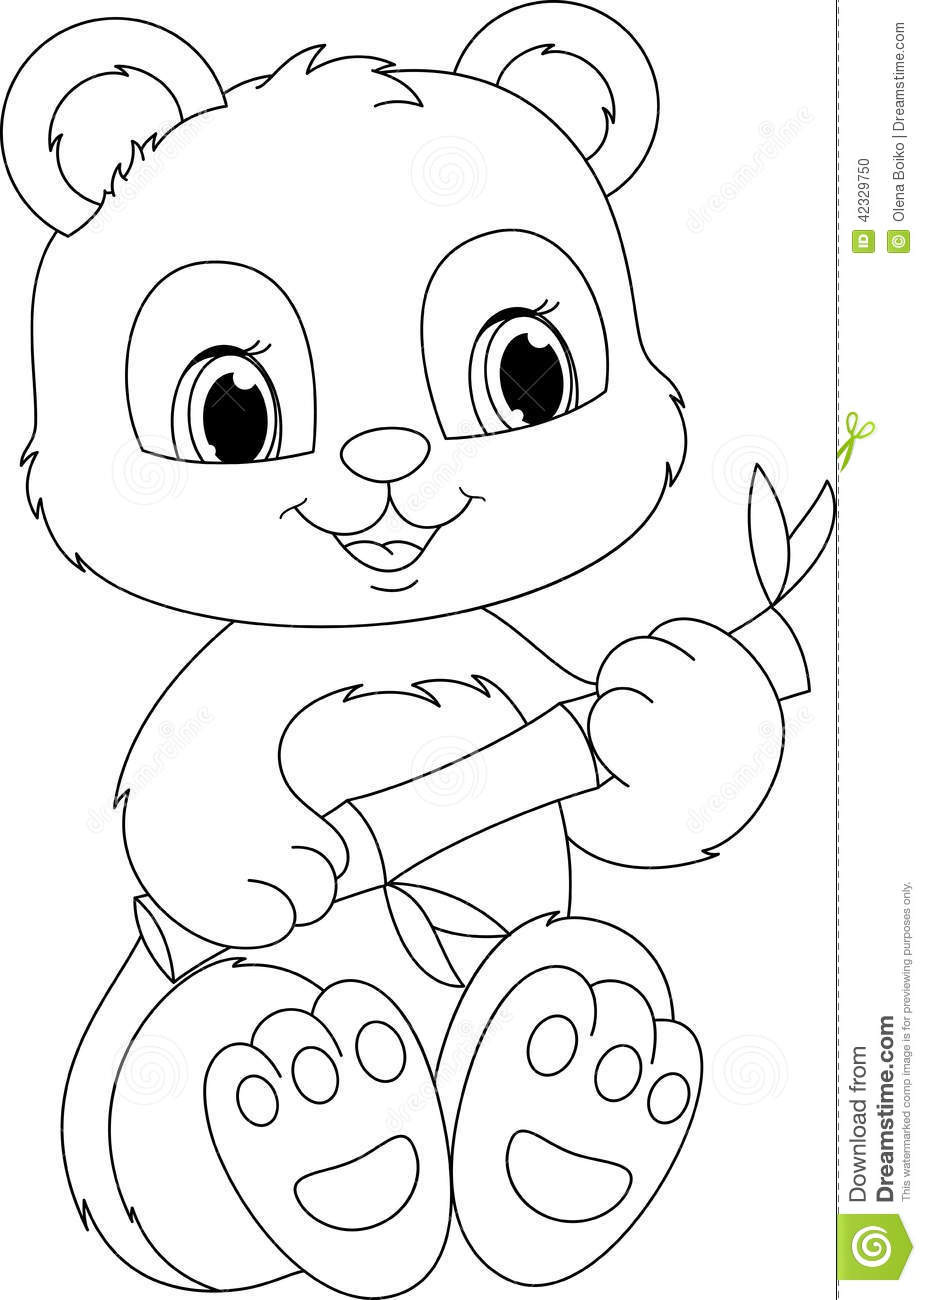 Panda Coloring Pages For Adults at GetColorings.com | Free printable